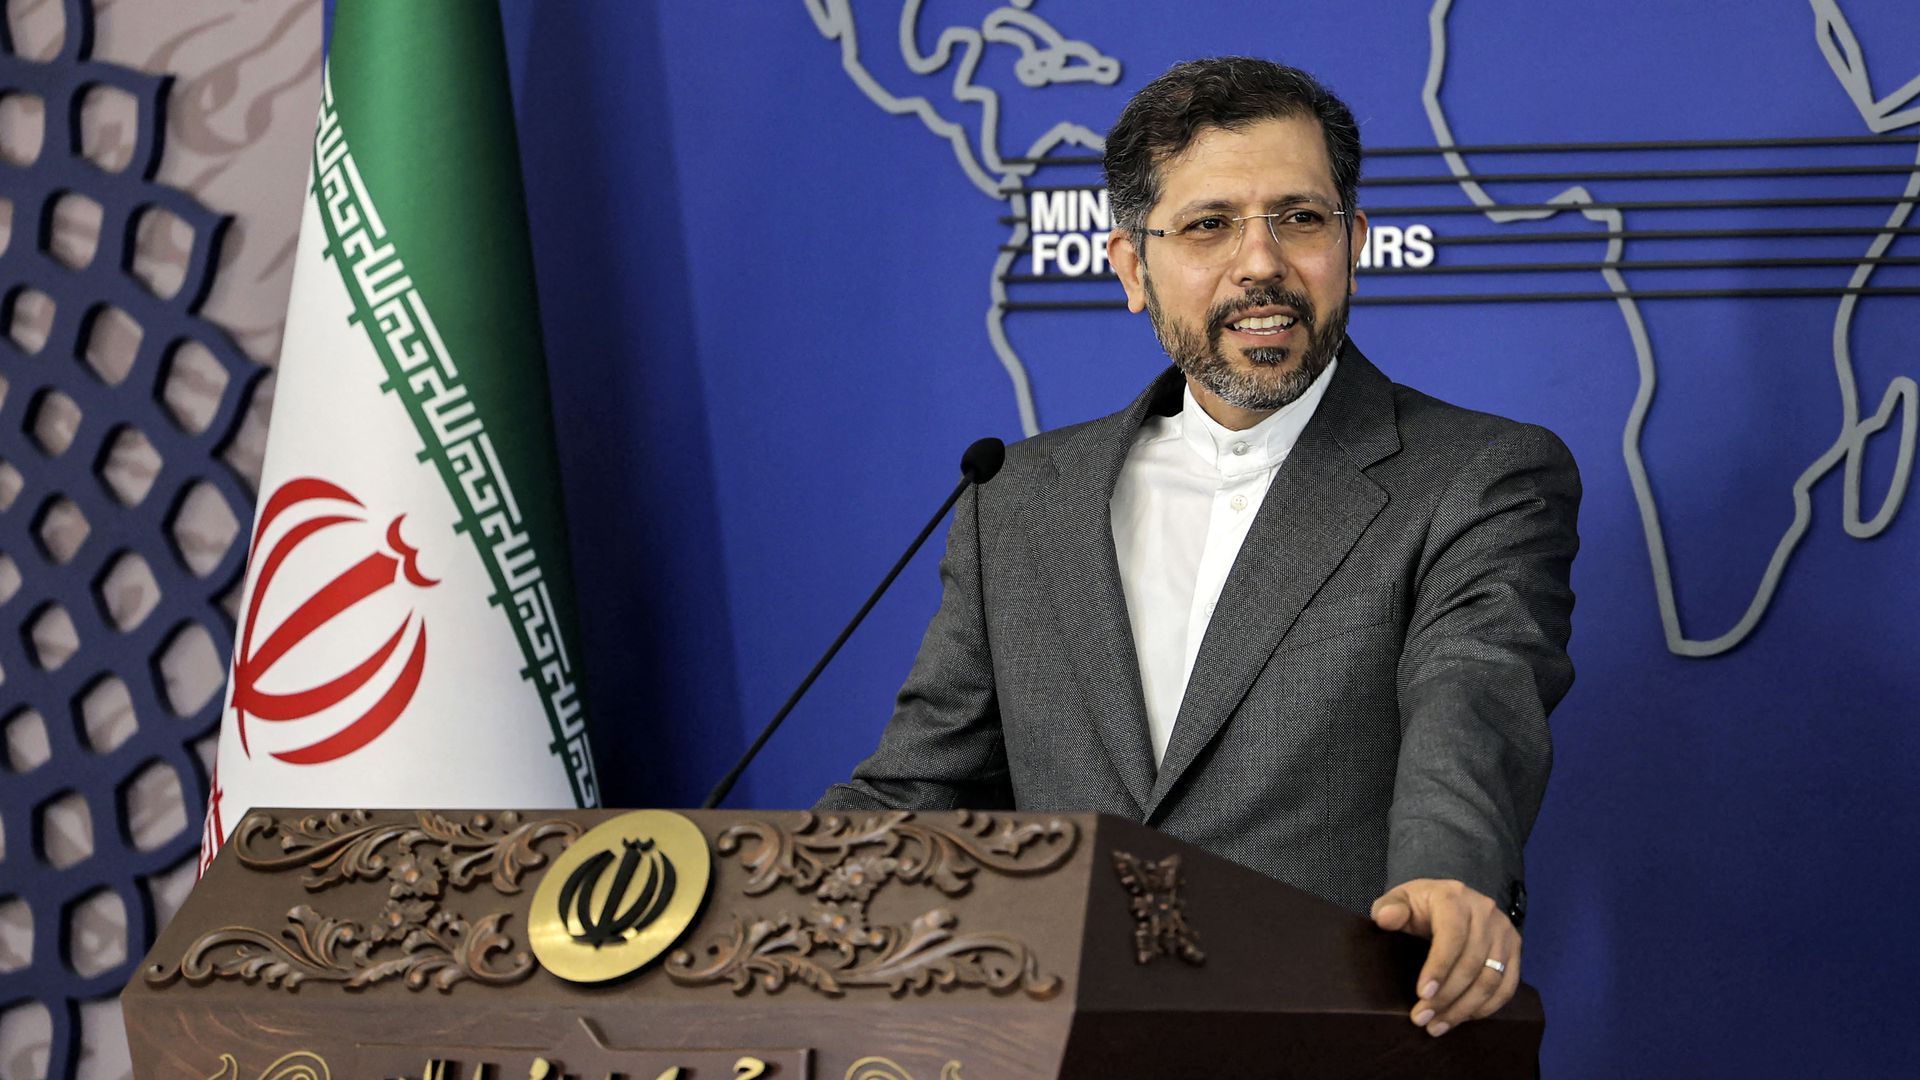 Iran's Foreign Ministry spokesperson Saeed Khatibzadeh holds a press conference in Tehran on May 9. Photo: Atta Kenare/AFP via Getty Images